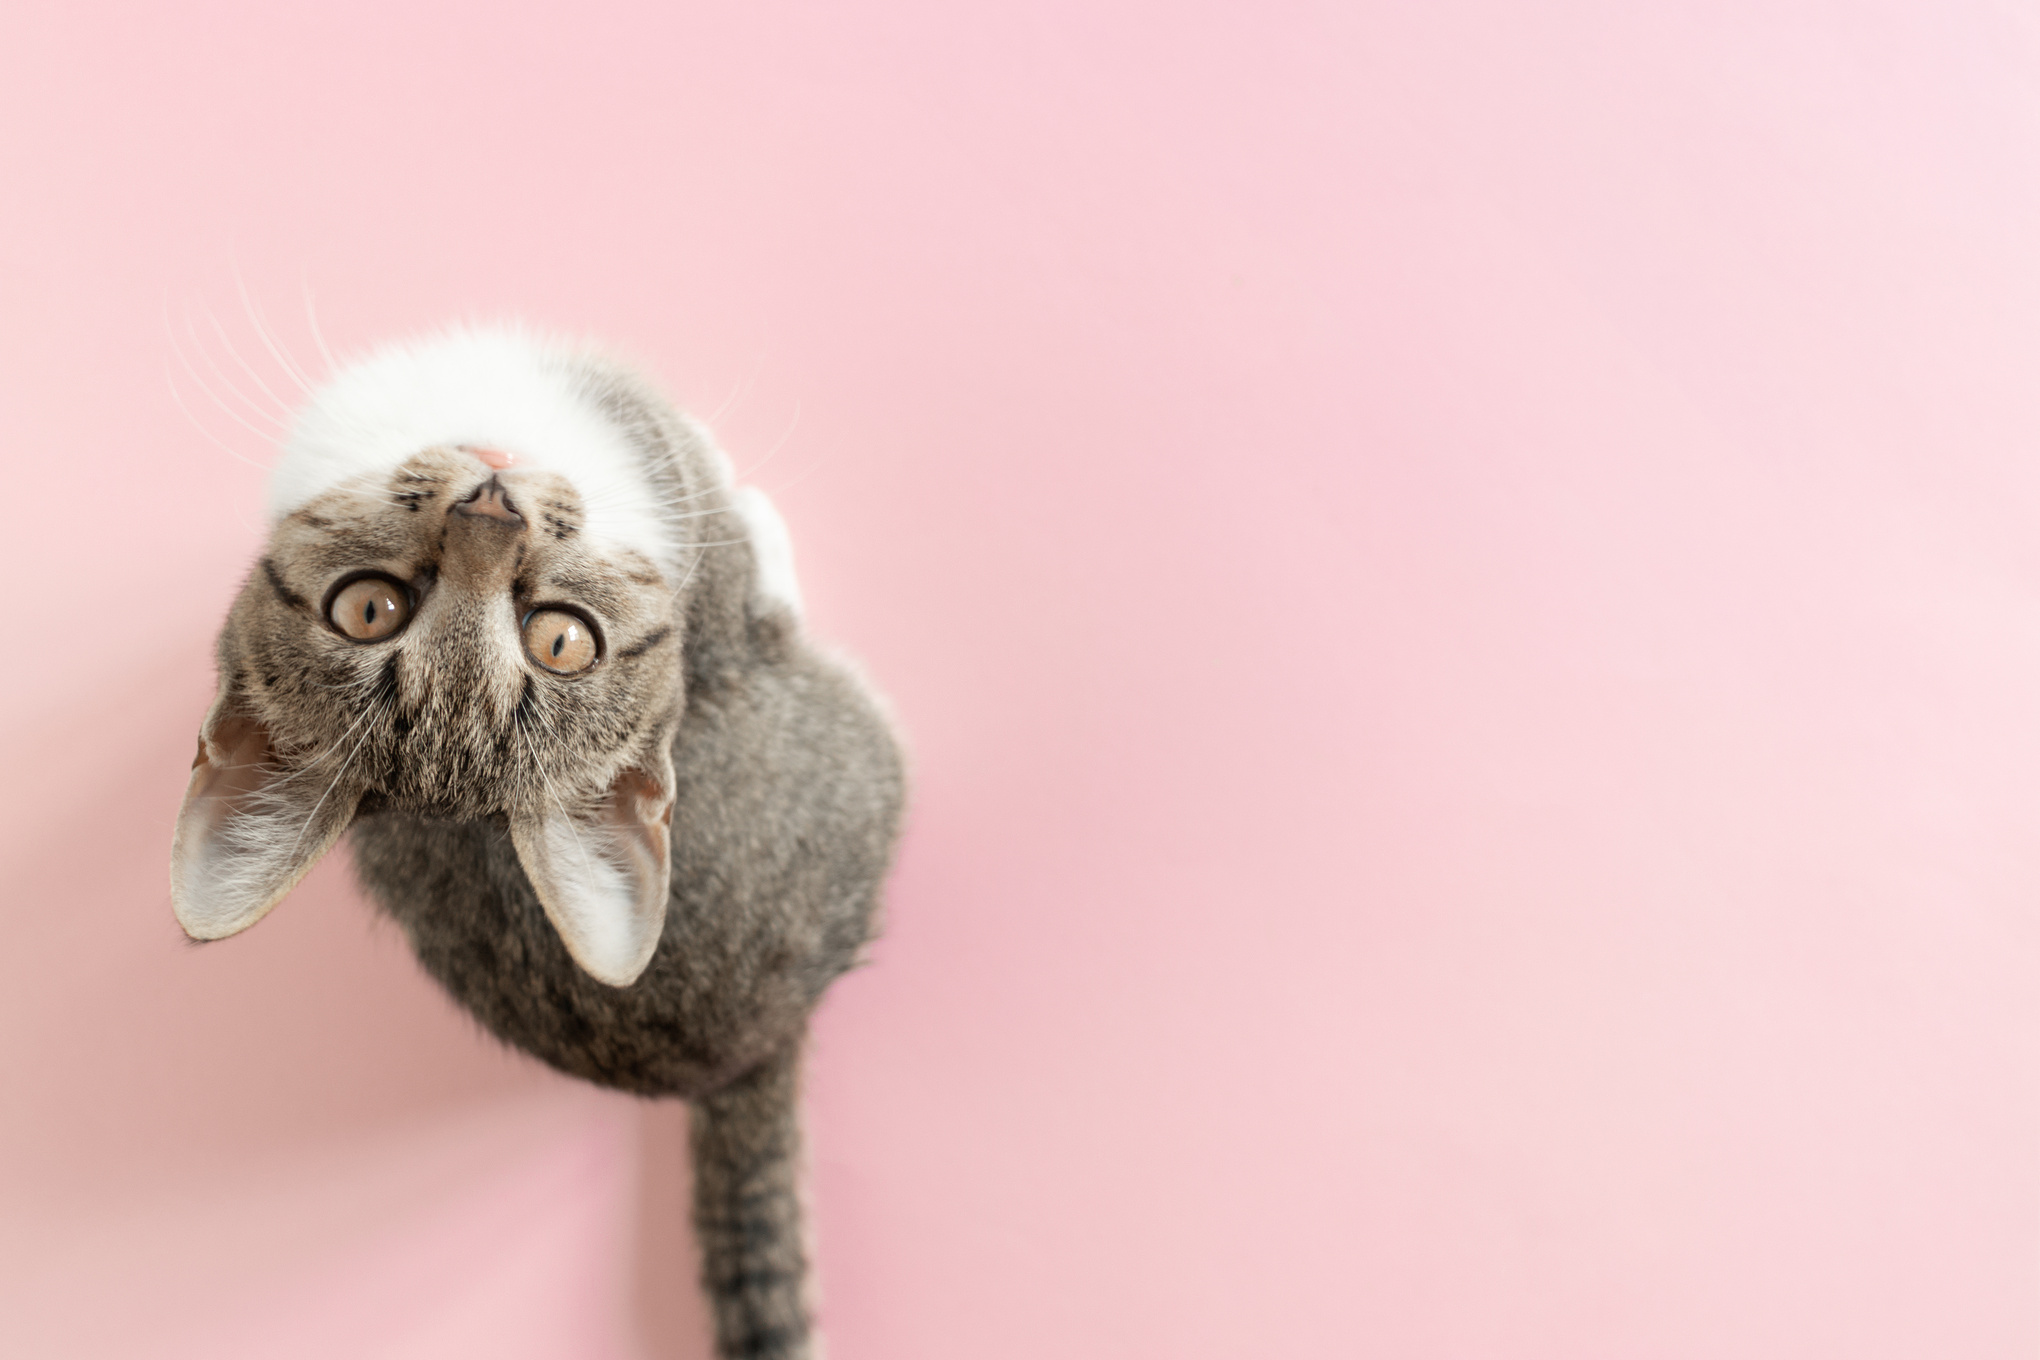 Cat Looking Up on Pink Background 